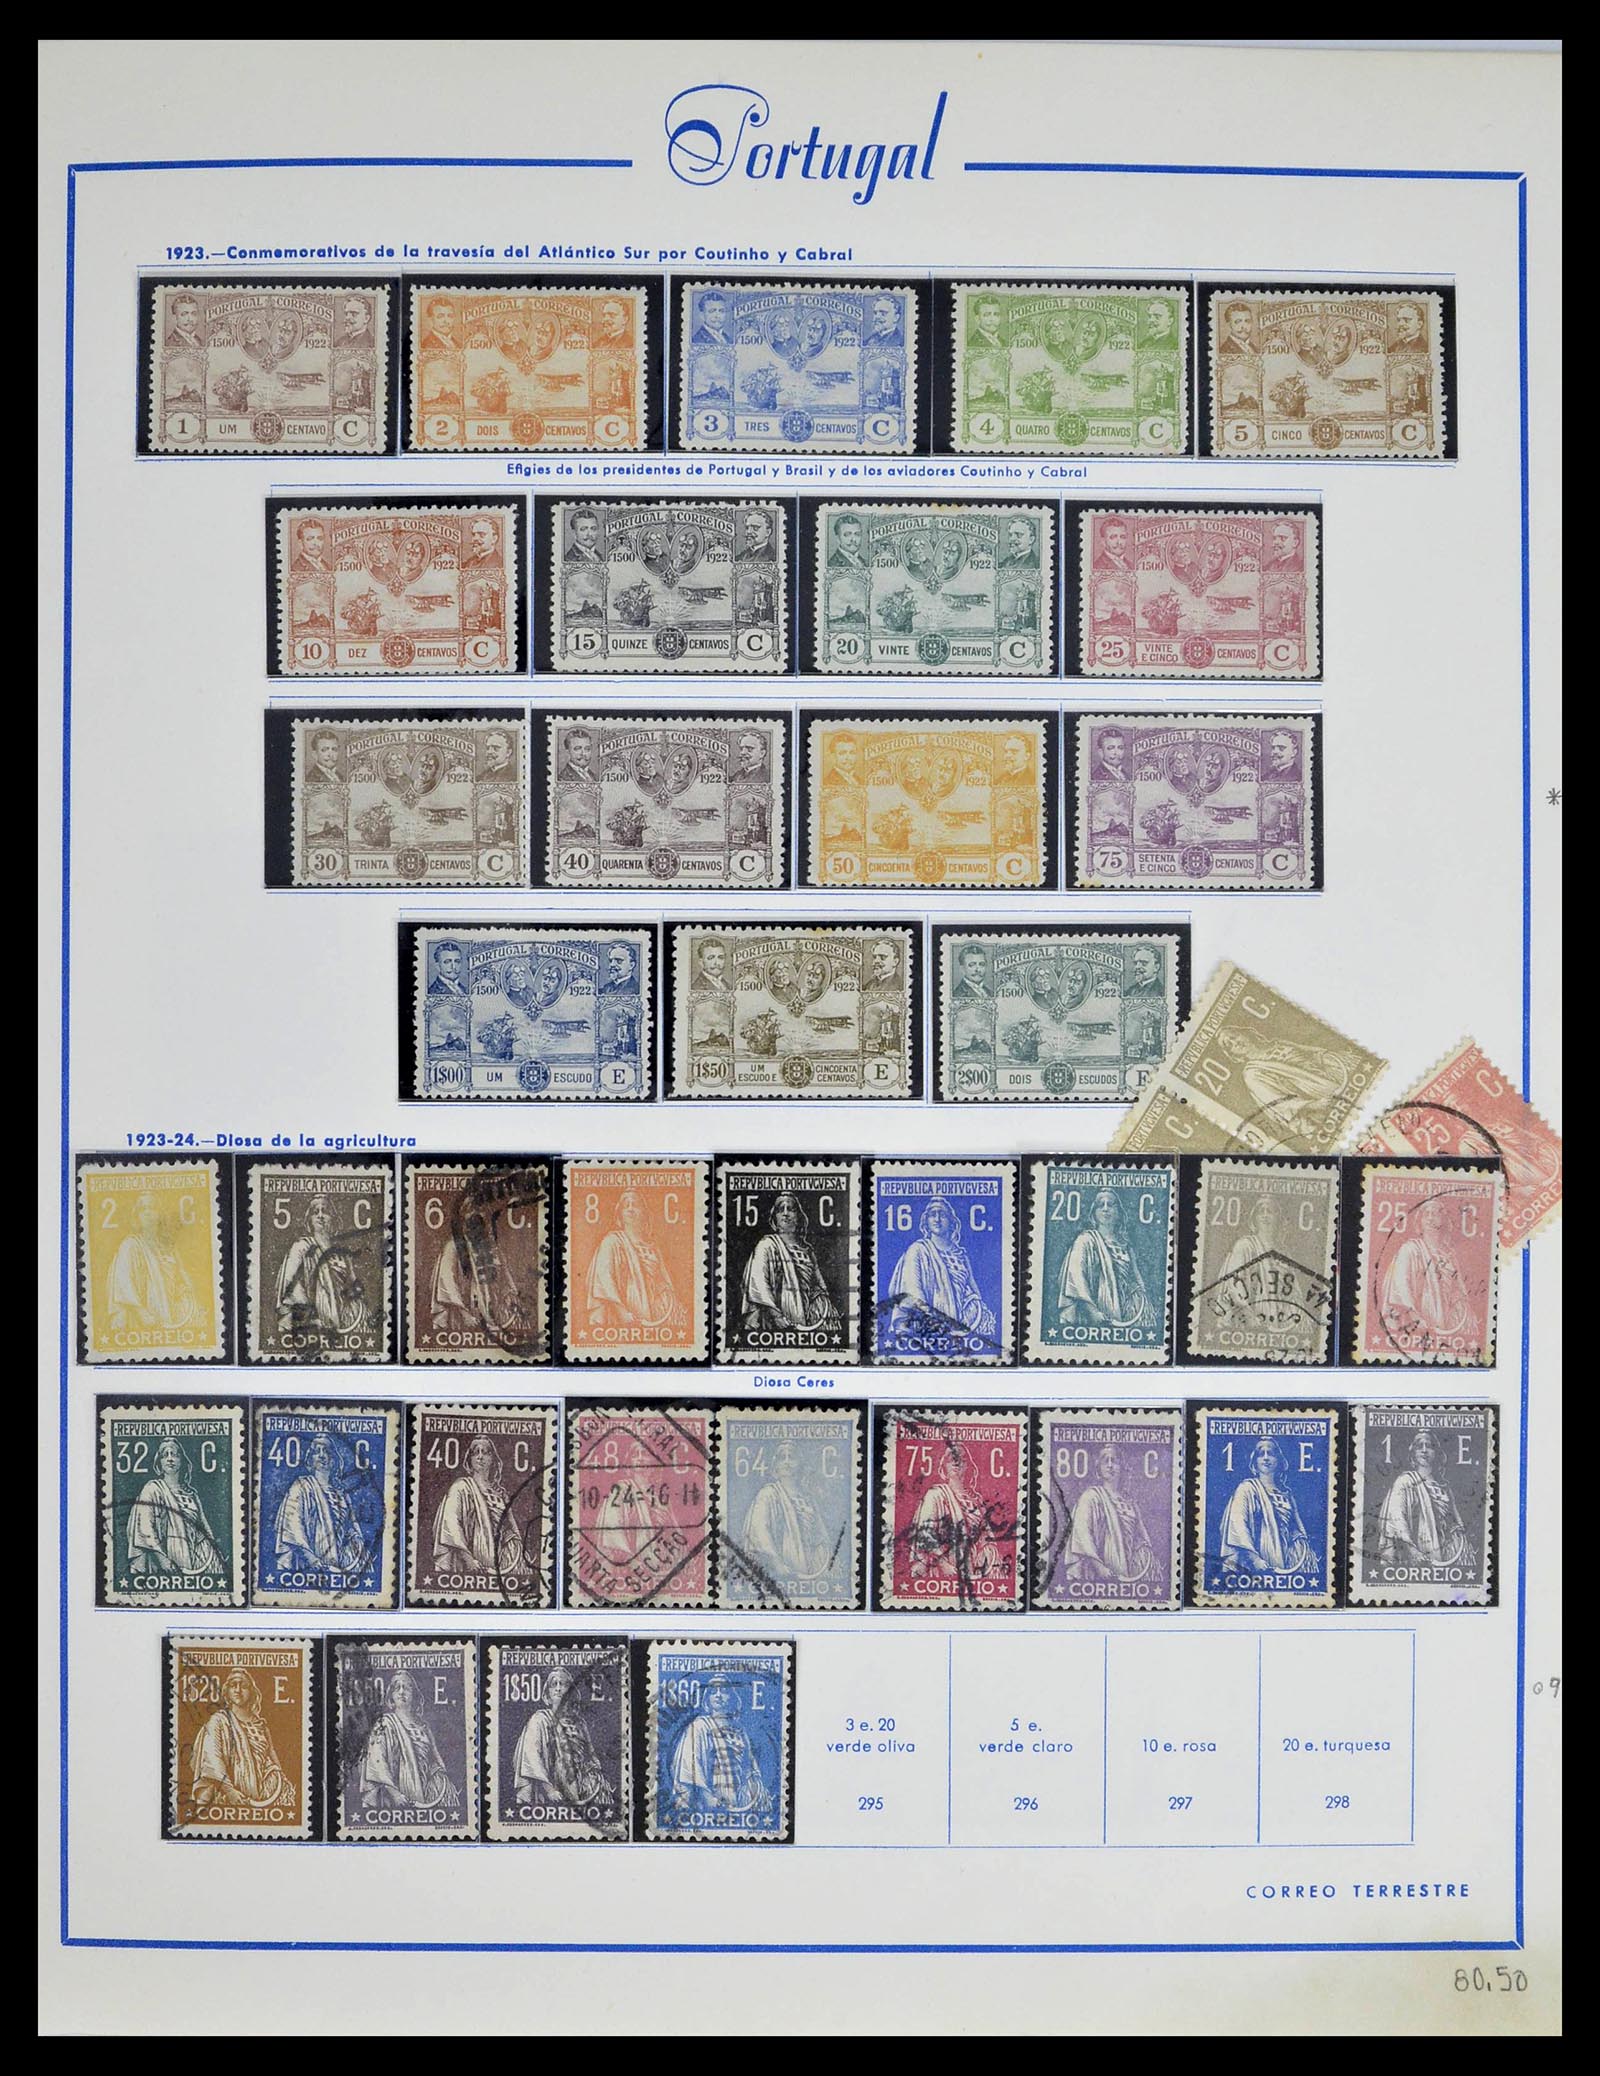 39233 0014 - Stamp collection 39233 Portugal 1853-1978.